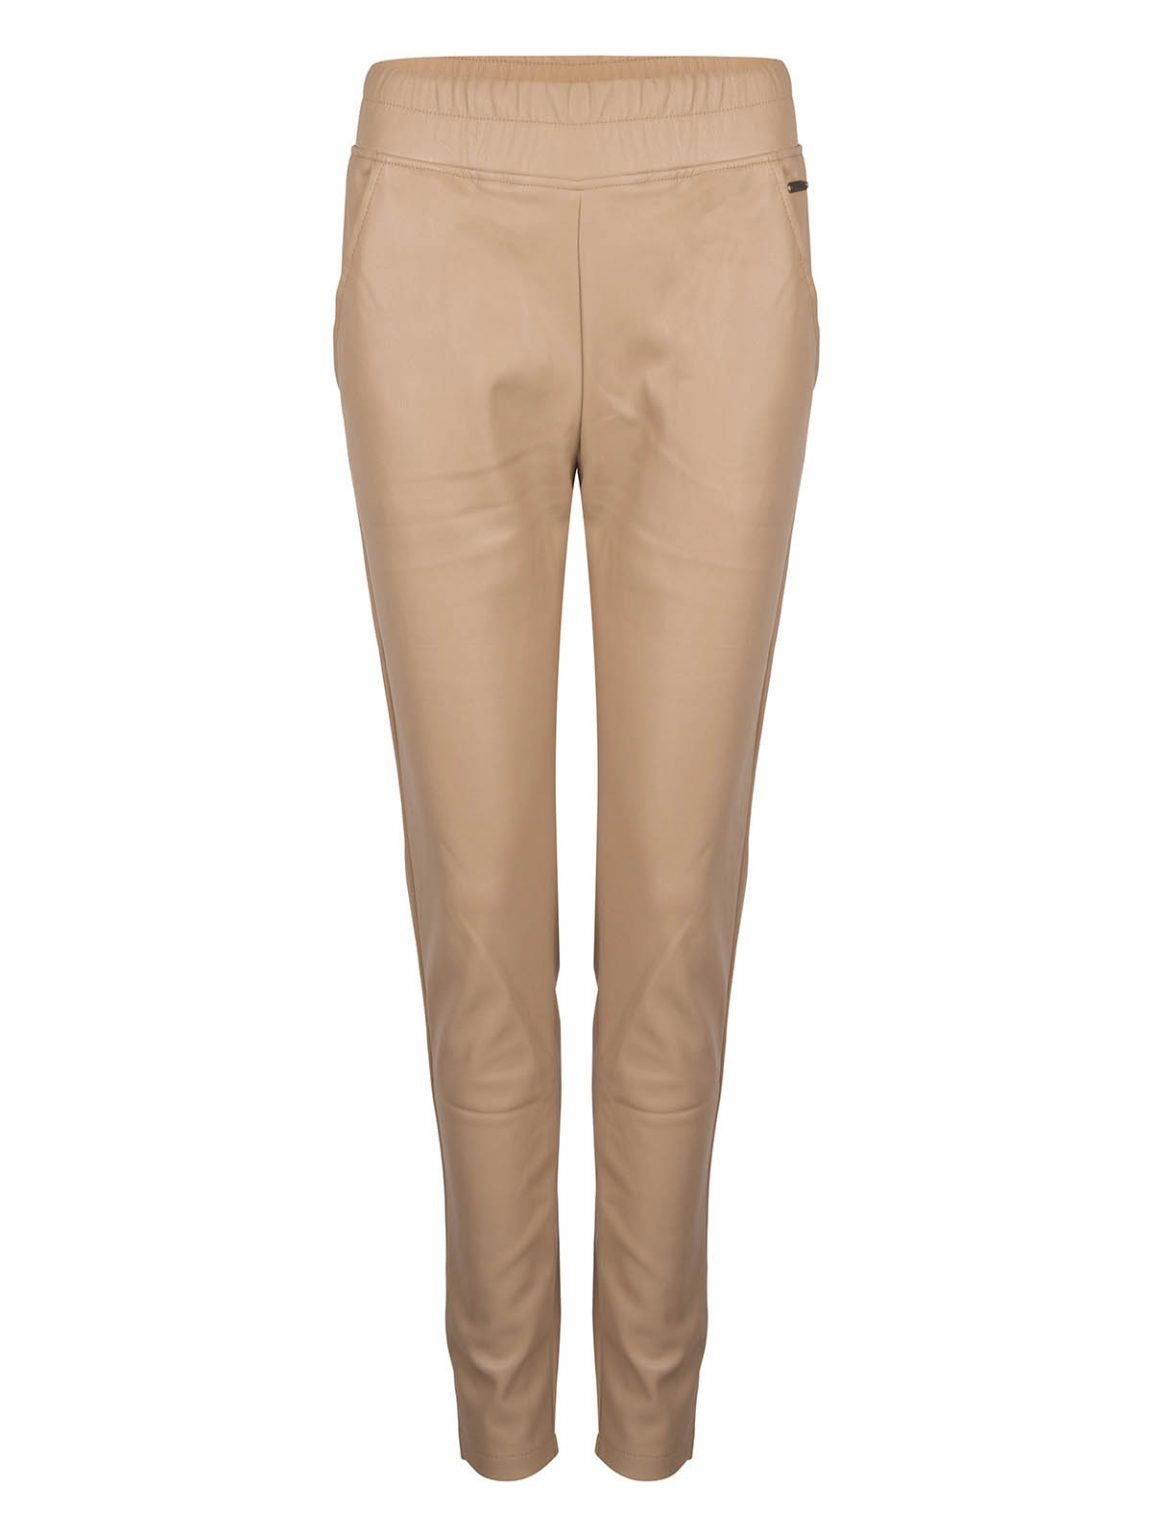 Leather Pants Winsome Camel